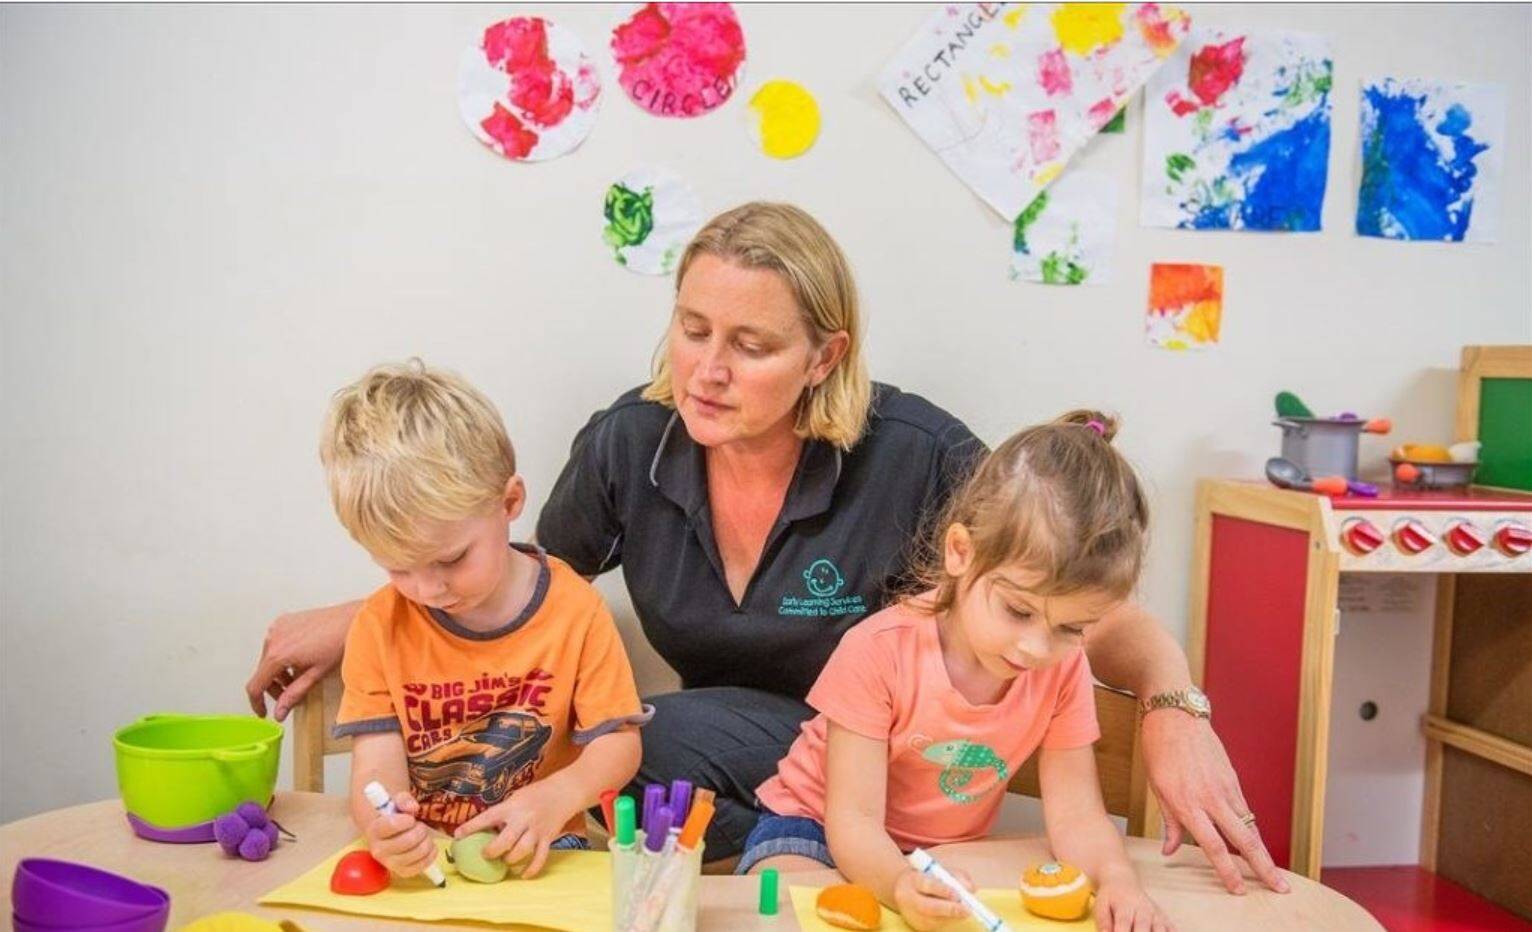 Collaroy Plateau Early Learning Centre